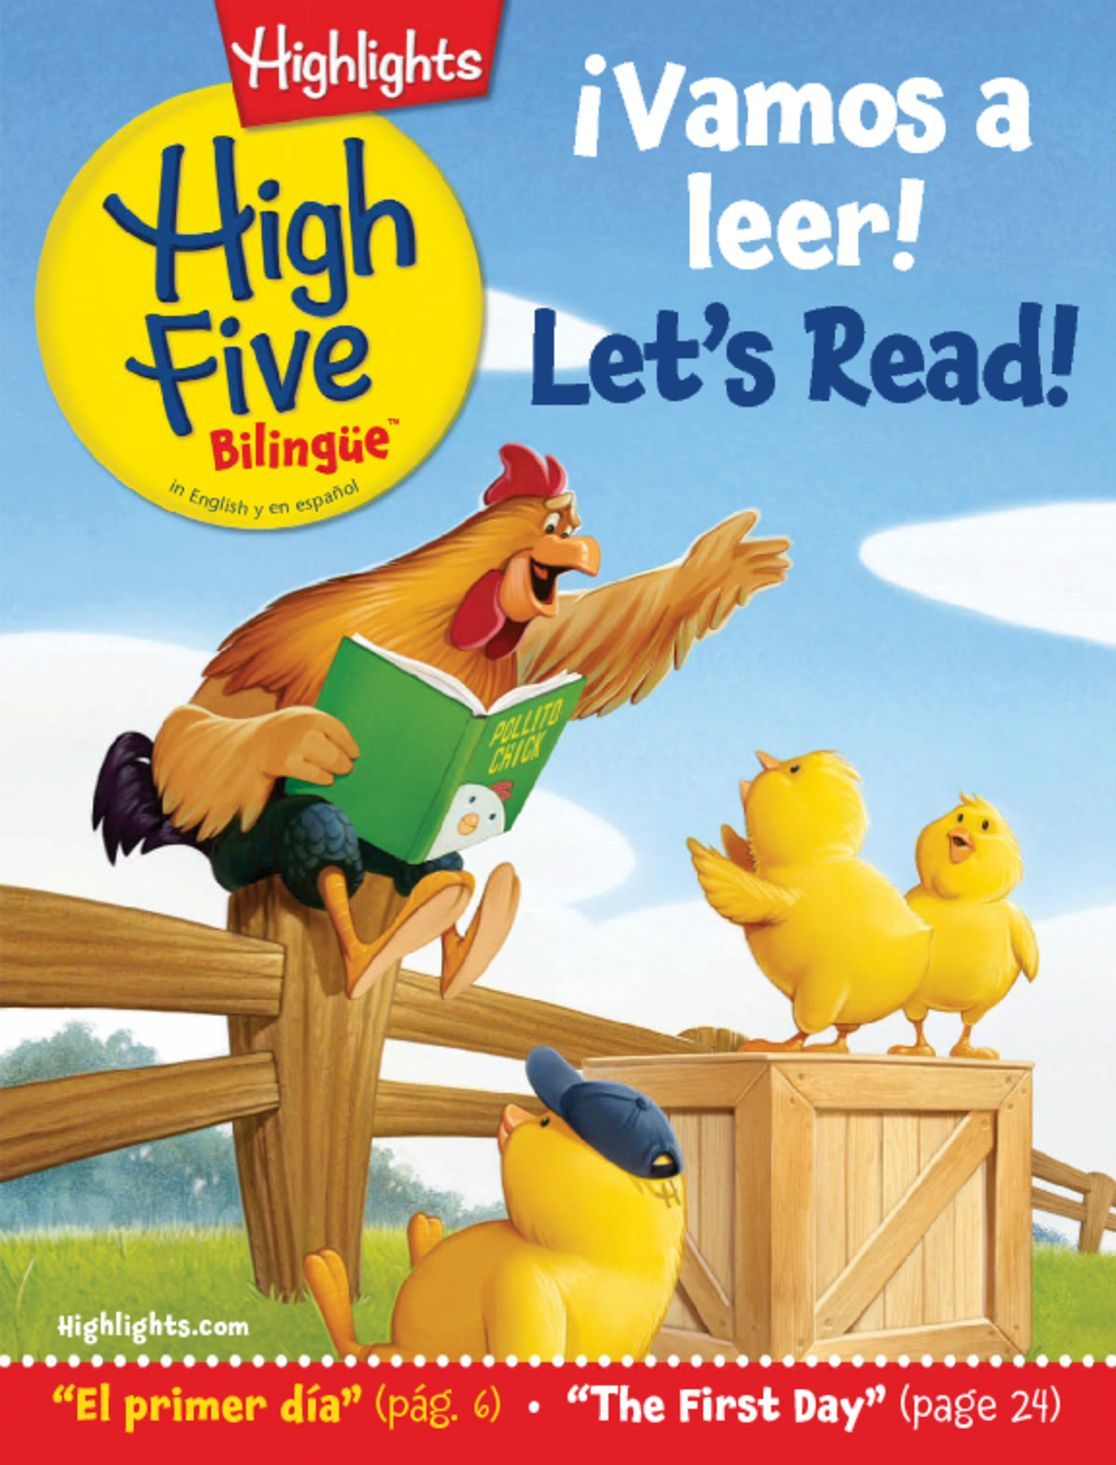 Highlights High Five Magazine Subscription from 39.99. Compare